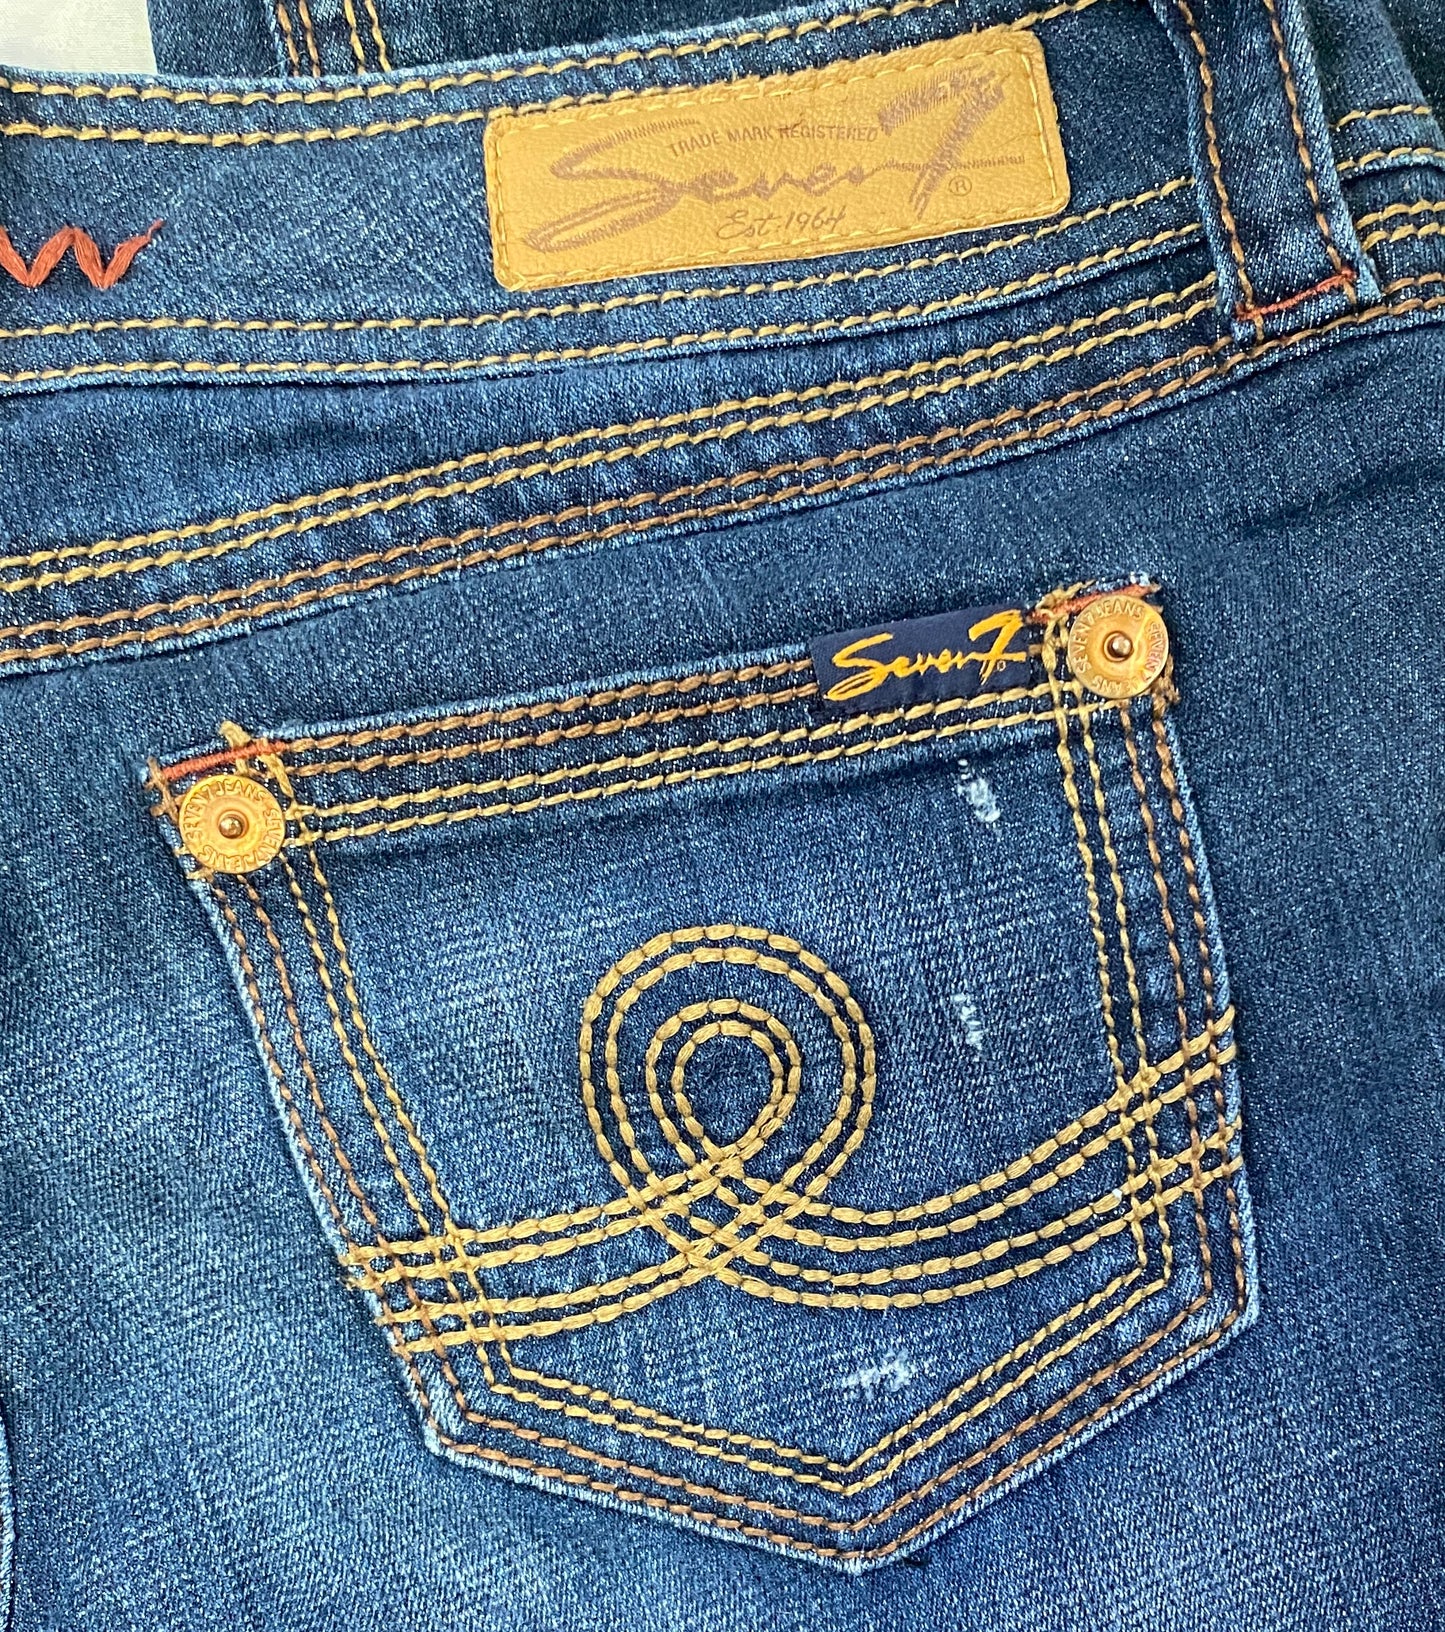 Seven For All Mankind introduces Foolproof denim innovation